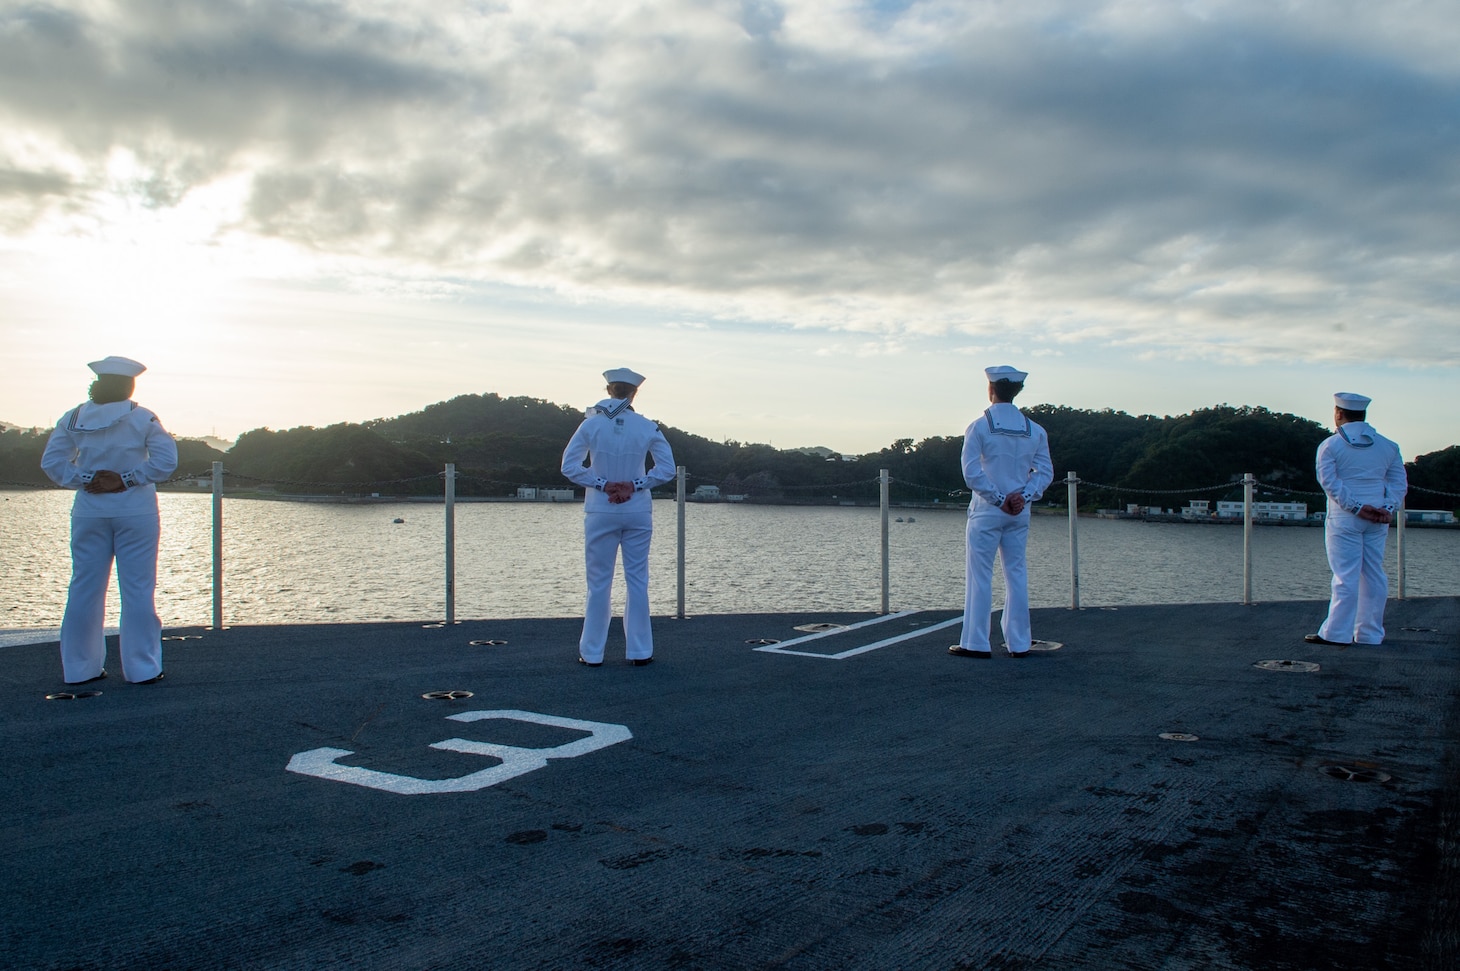 220912-N-IG750-1057 YOKOSUKA, Japan (Sept. 12, 2022) Sailors man the rails on the flight deck aboard the U.S. Navy’s only forward-deployed aircraft carrier, USS Ronald Reagan (CVN 76), as the ship departs Commander, Fleet Activities Yokosuka, Sept. 12. Ronald Reagan, the flagship of Carrier Strike Group 5, provides a combat-ready force that protects and defends the United States, and supports alliances, partnerships and collective maritime interests in the Indo-Pacific region. (U.S. Navy photo by Mass Communication Specialist 2nd Class Caleb Dyal)